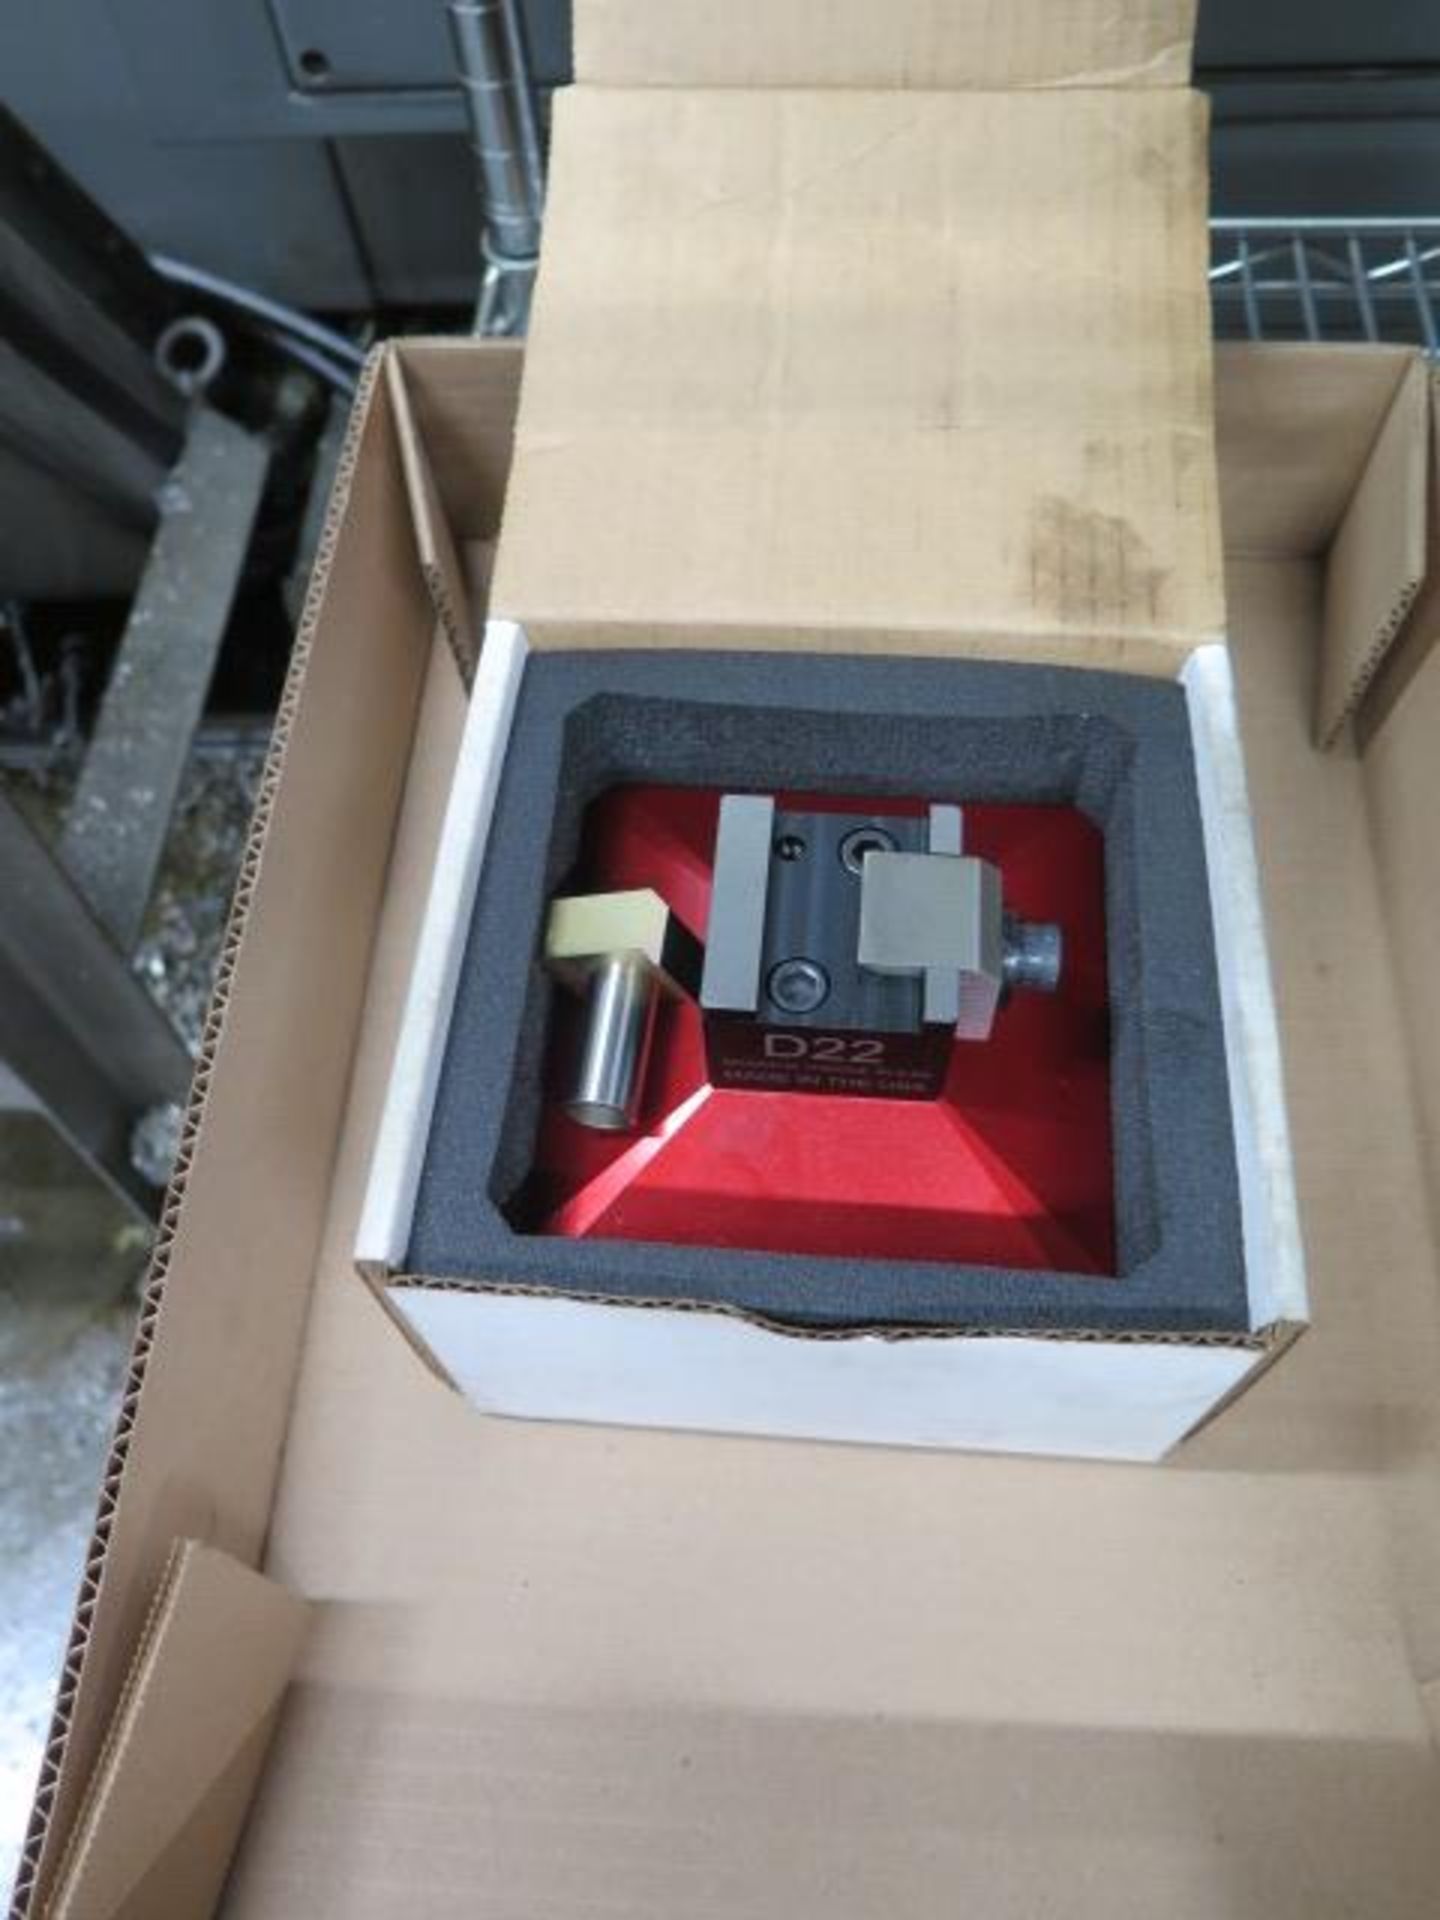 5th Axis mdl. R96-D22 Quick Change 2" Vise (SOLD AS-IS - NO WARRANTY) - Image 2 of 6